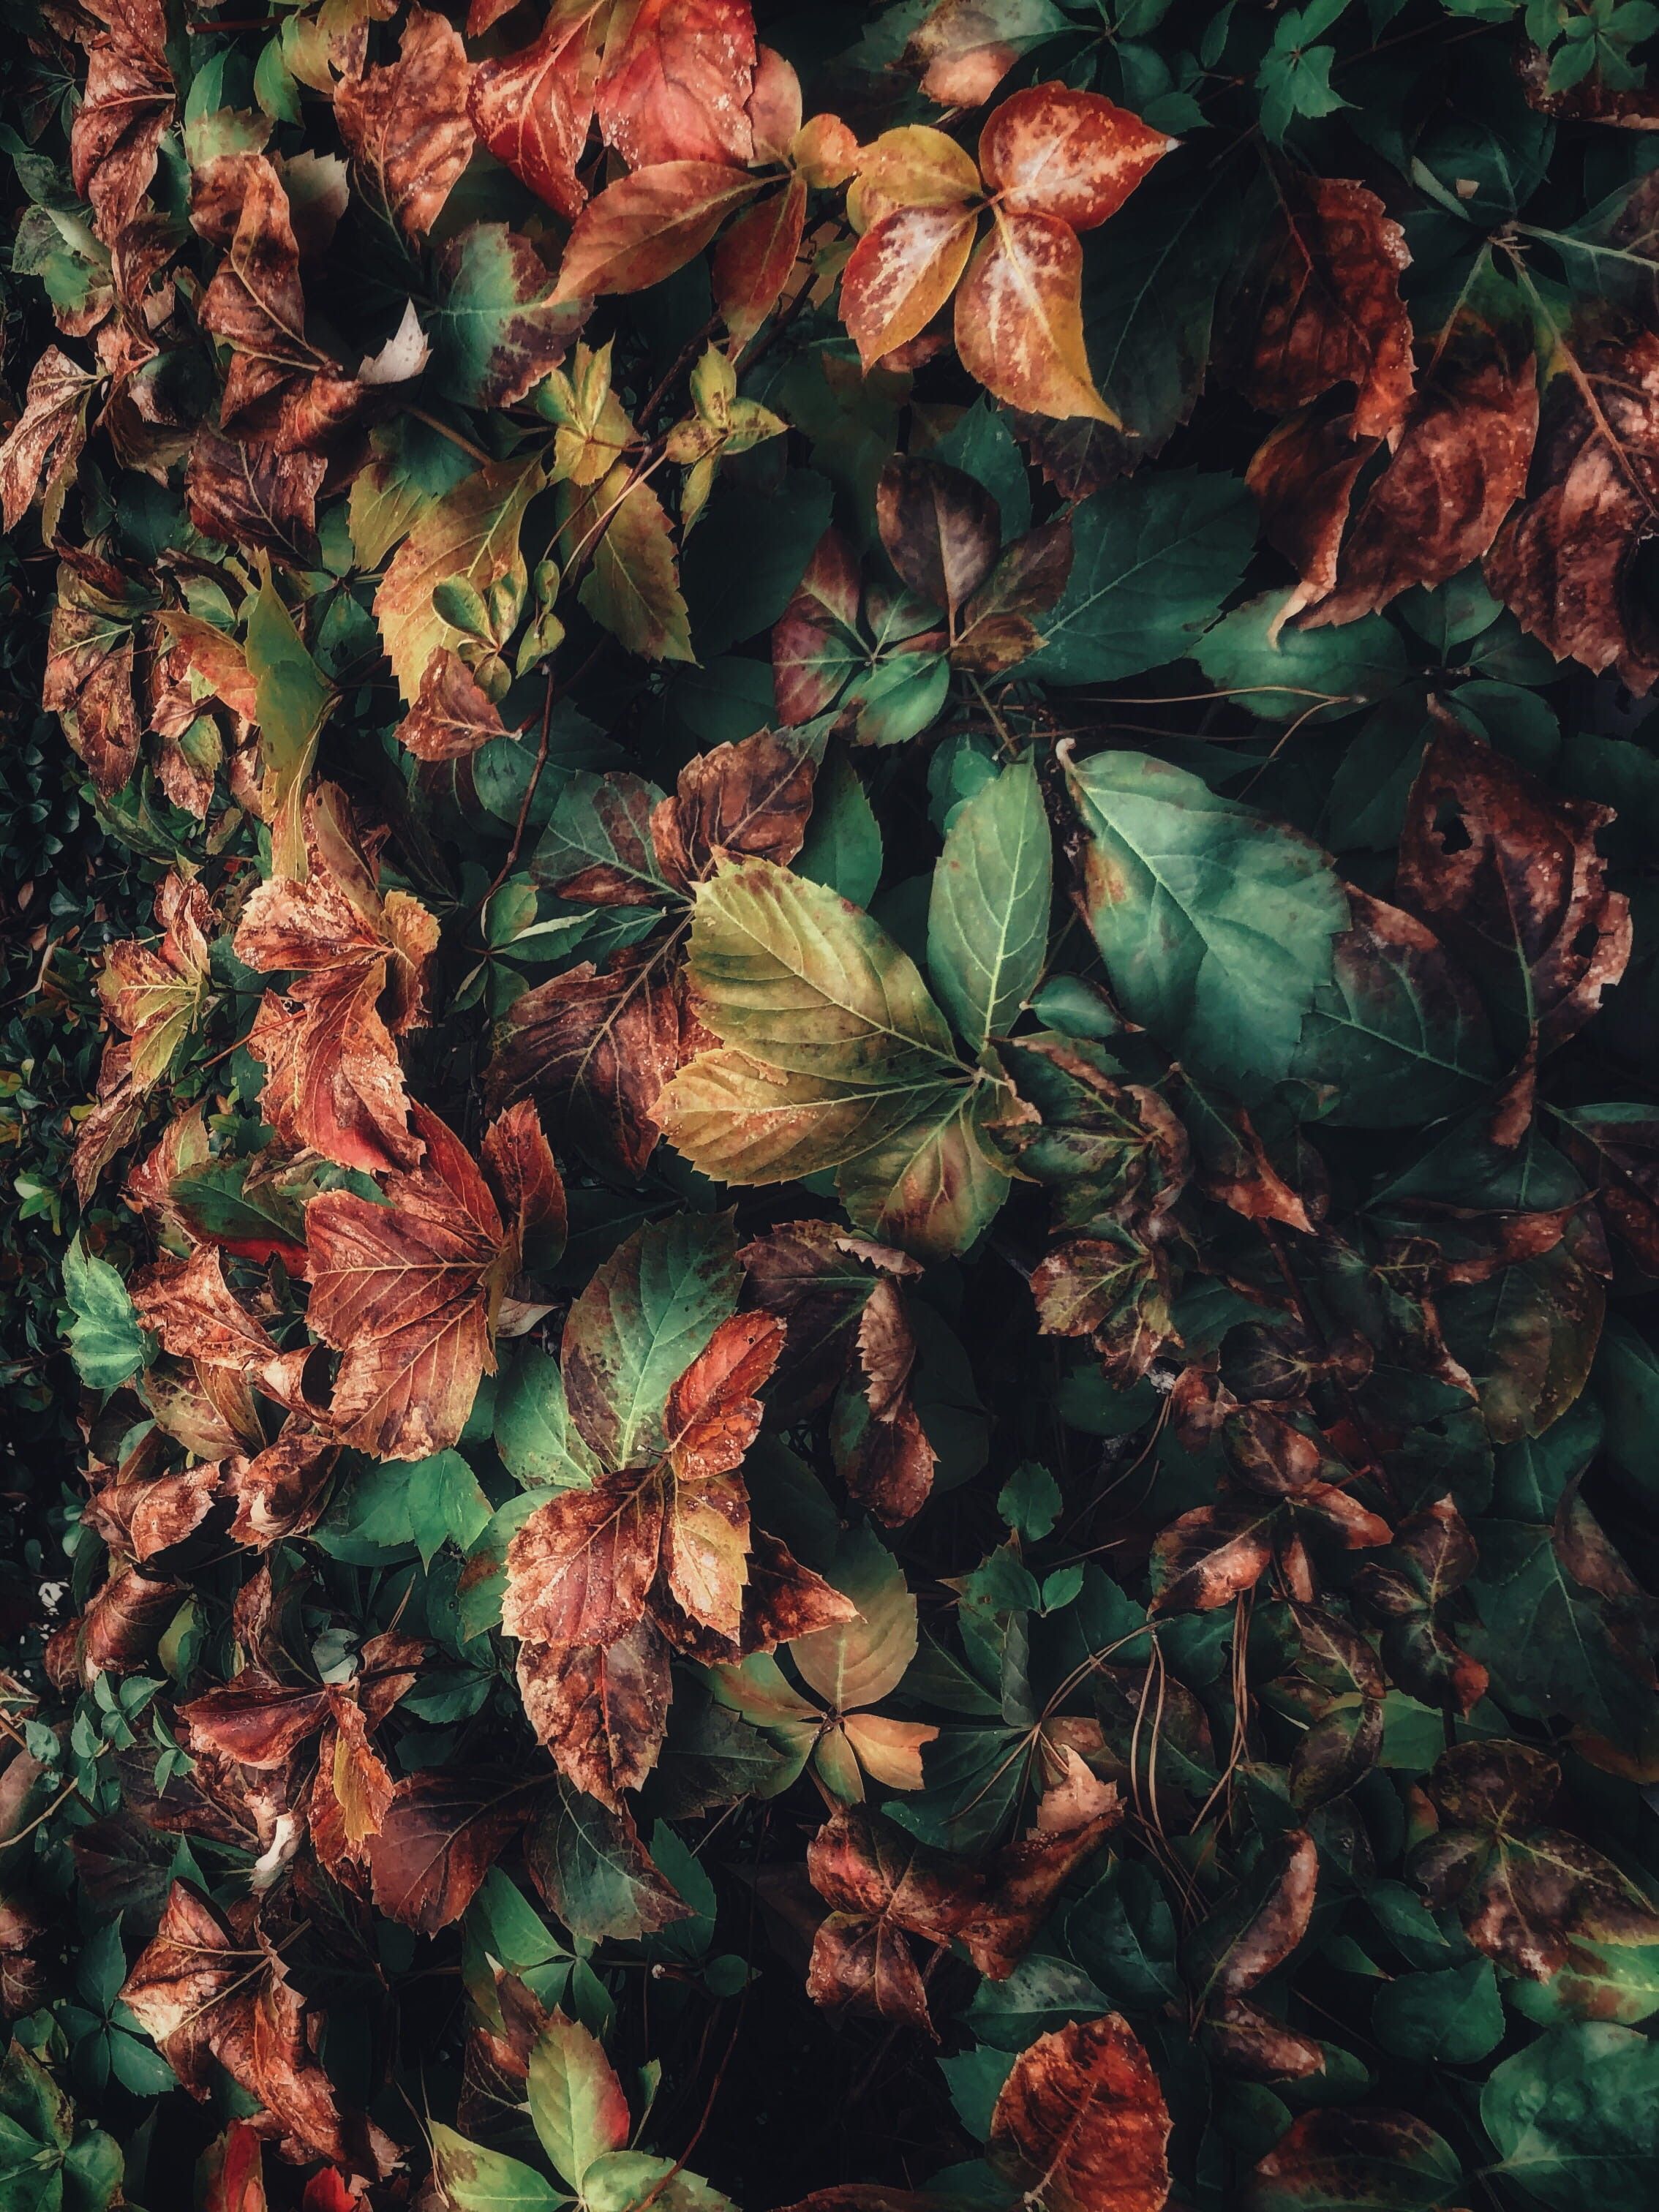 Wallpaper / Vulnerability, Aesthetic, Iphone, Winter, Beauty In Nature, Change, Iphone Wallpaper, Hd, Close Up, Shot On Iphone, Leaves, Colors, Mobile Wallpaper, Wilted Plant Free Download